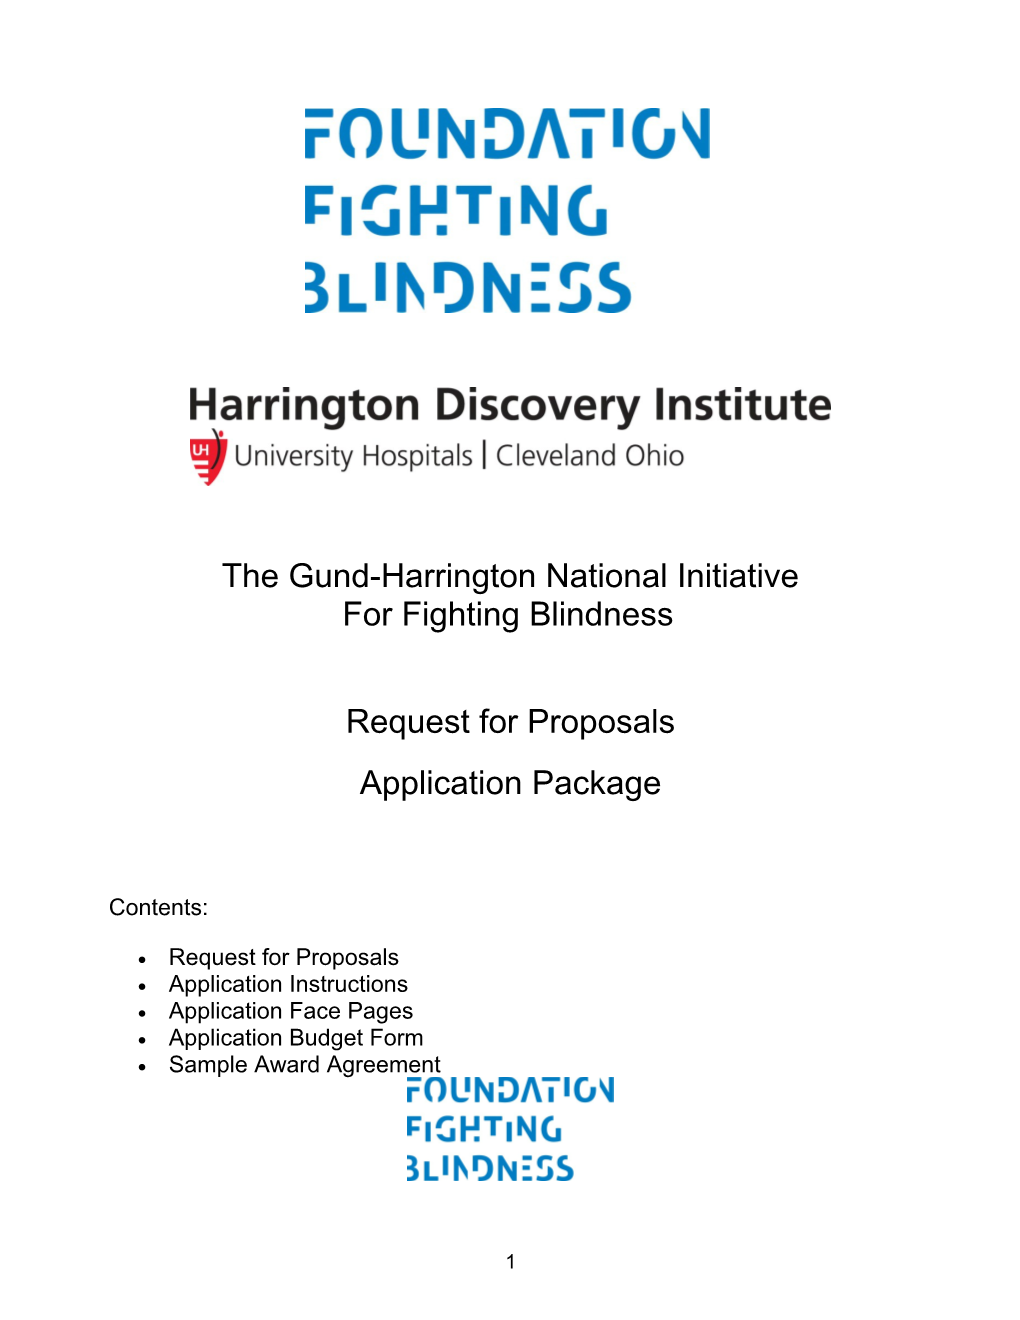 The Gund-Harrington National Initiative for Fighting Blindness 2016 Request for Proposals